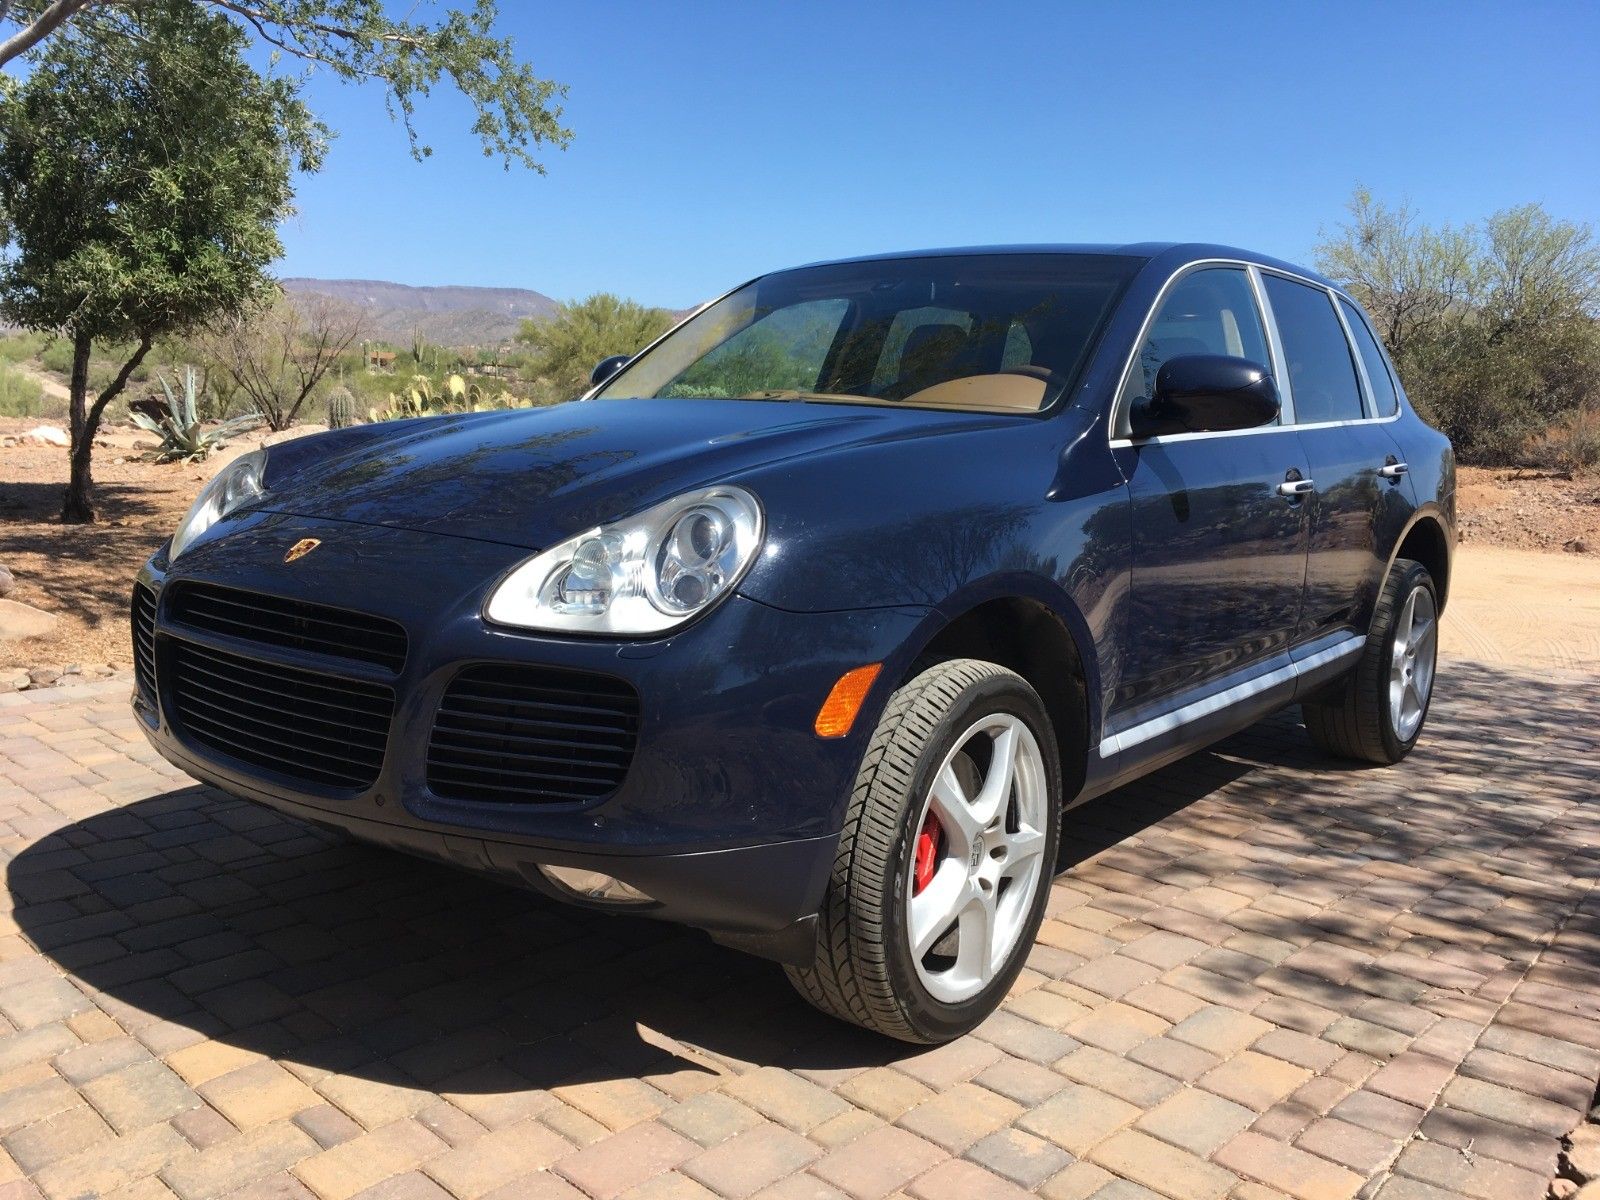 06 Porsche Cayenne Turbo S 06 Porsche Cayenne Turbo S 22 23 Is In Stock And For Sale Price Review 22 23